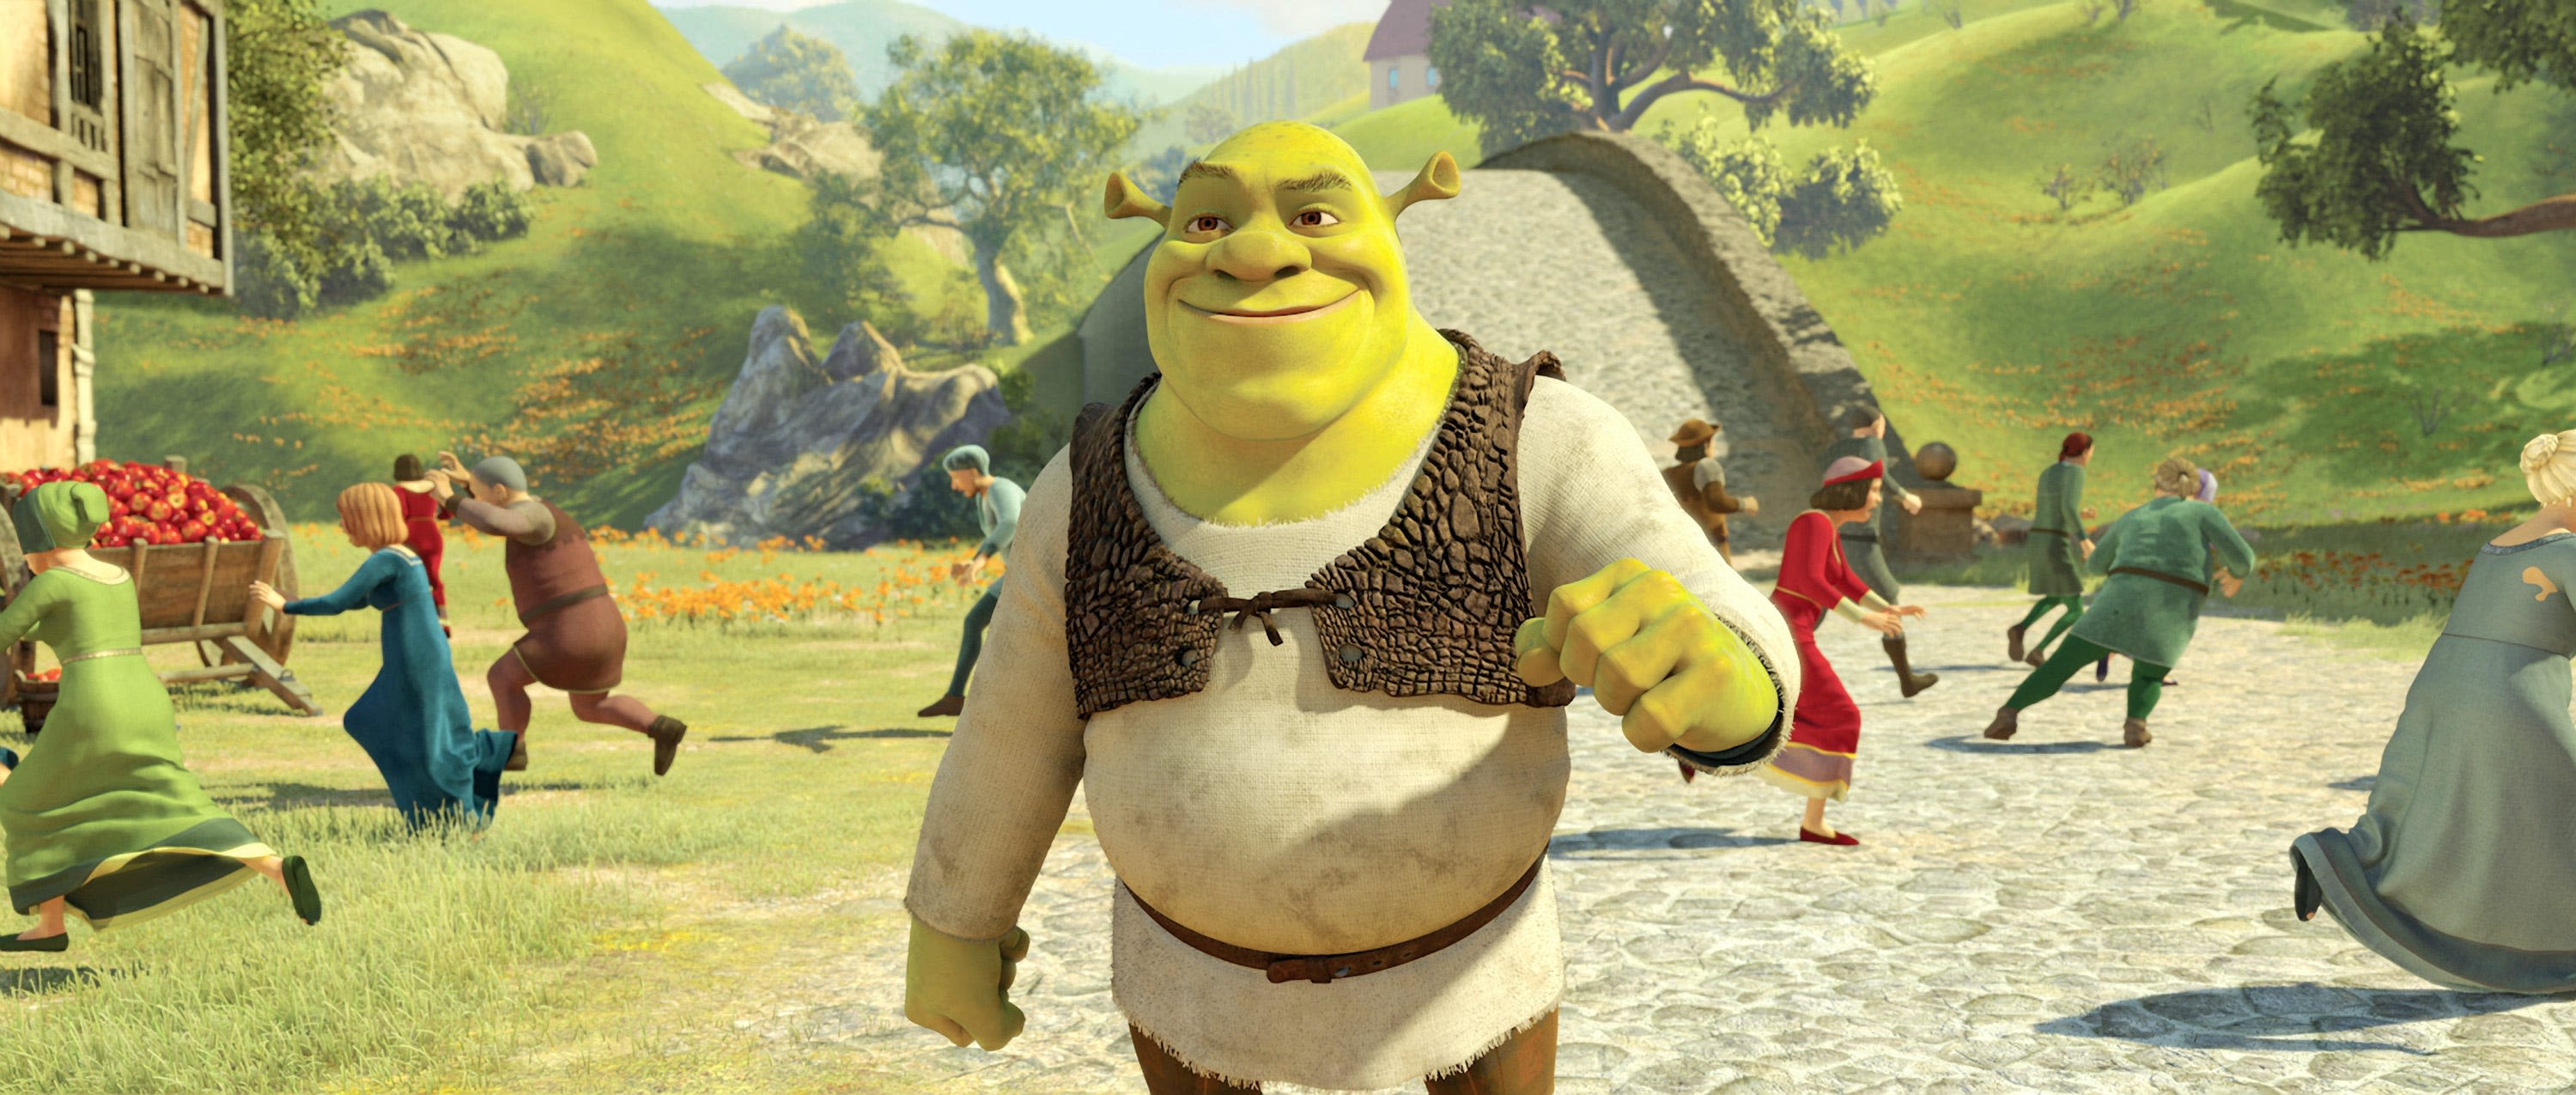 Shrek movies in order: Catch up on all the films in time for 'Shrek 5'